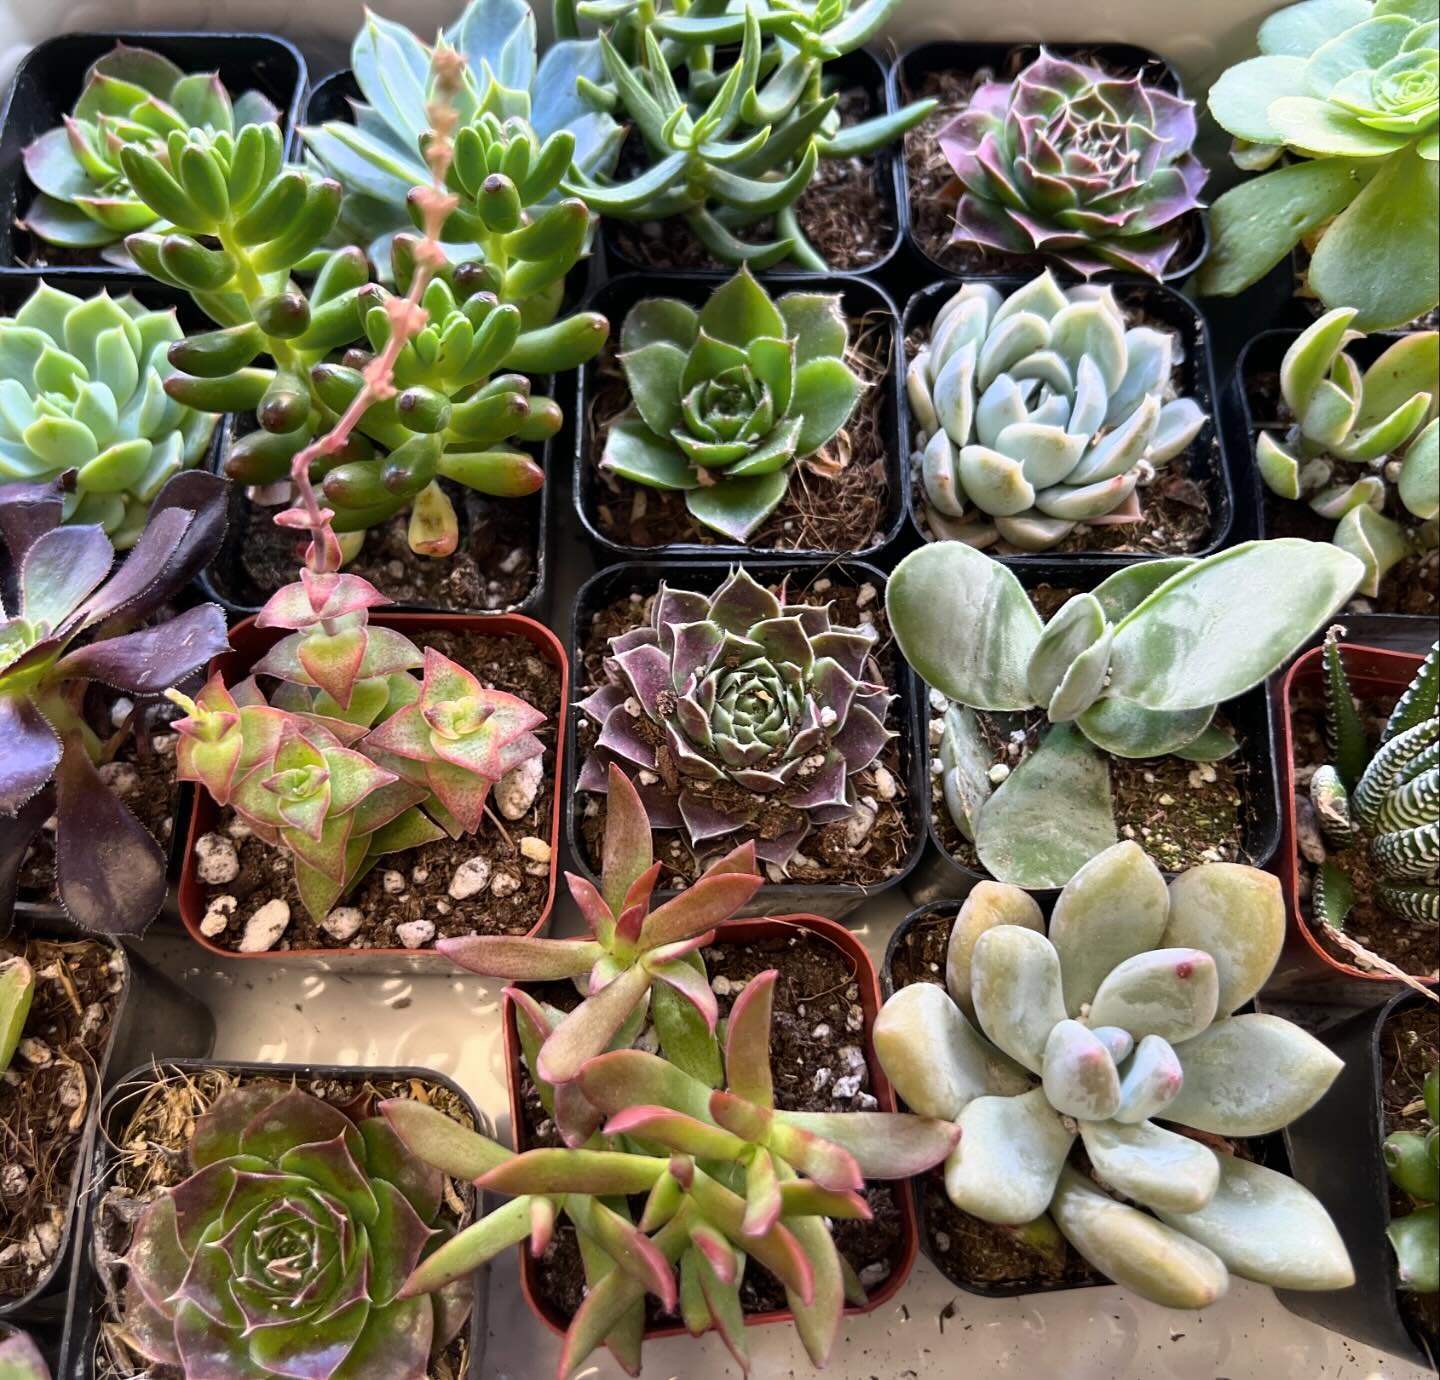 LOTS of new succulents and cacti are in stock! We also have tons of plant stakes, and beautiful sun catchers!